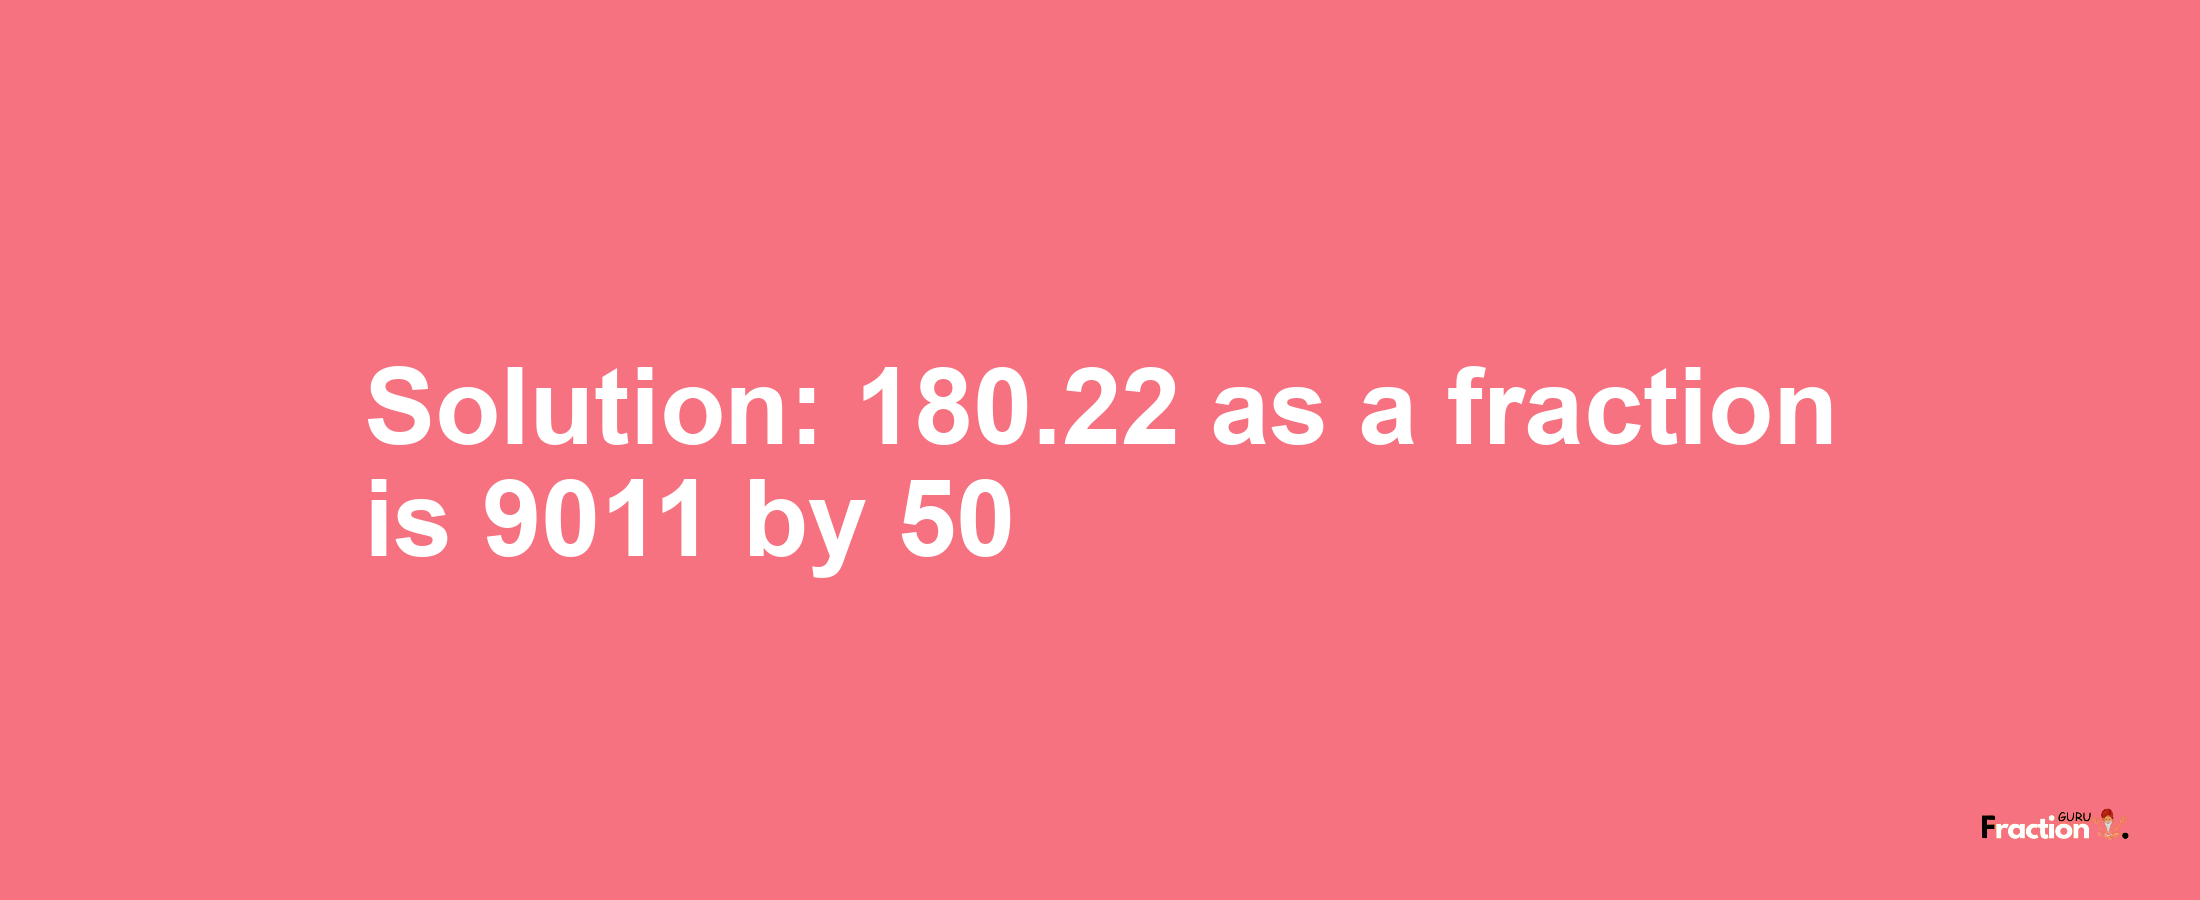 Solution:180.22 as a fraction is 9011/50